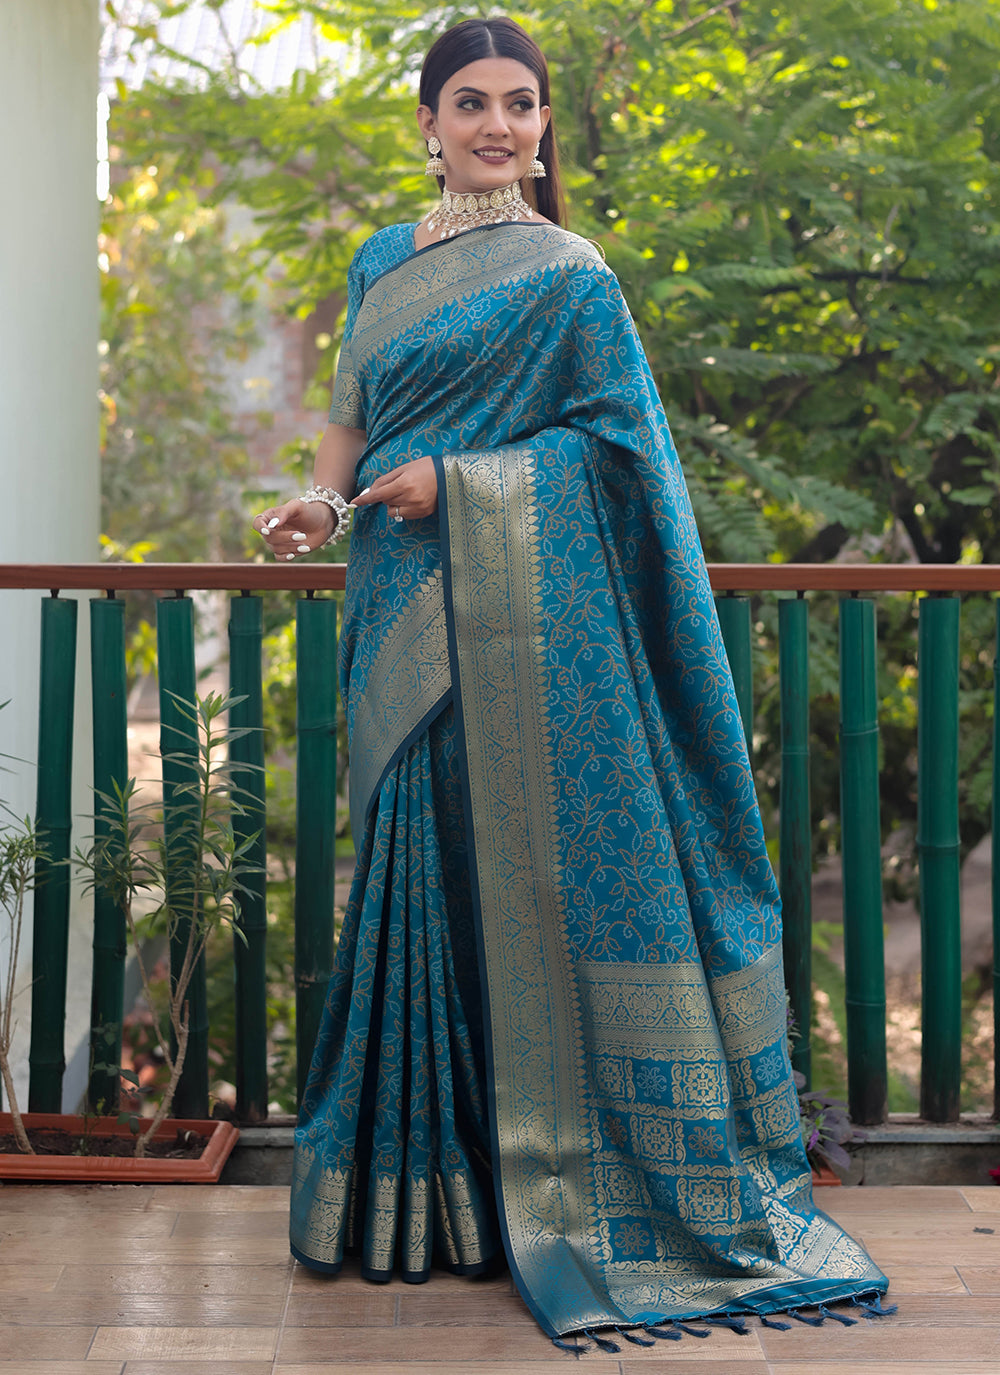 Contemporary Style Saree For Mehndi